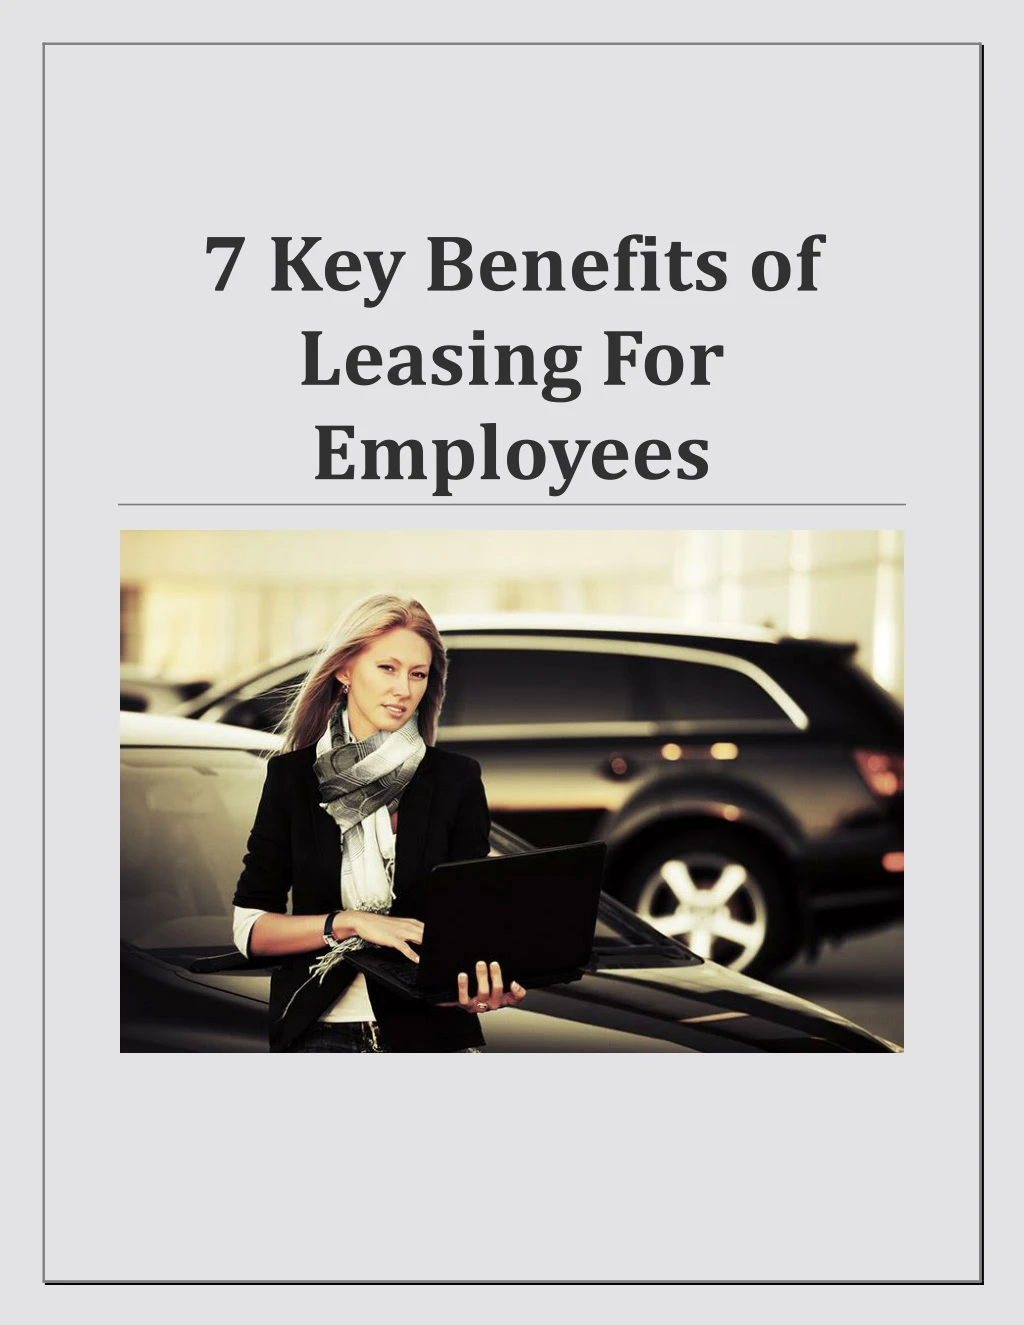 7 key benefits of leasing for employees